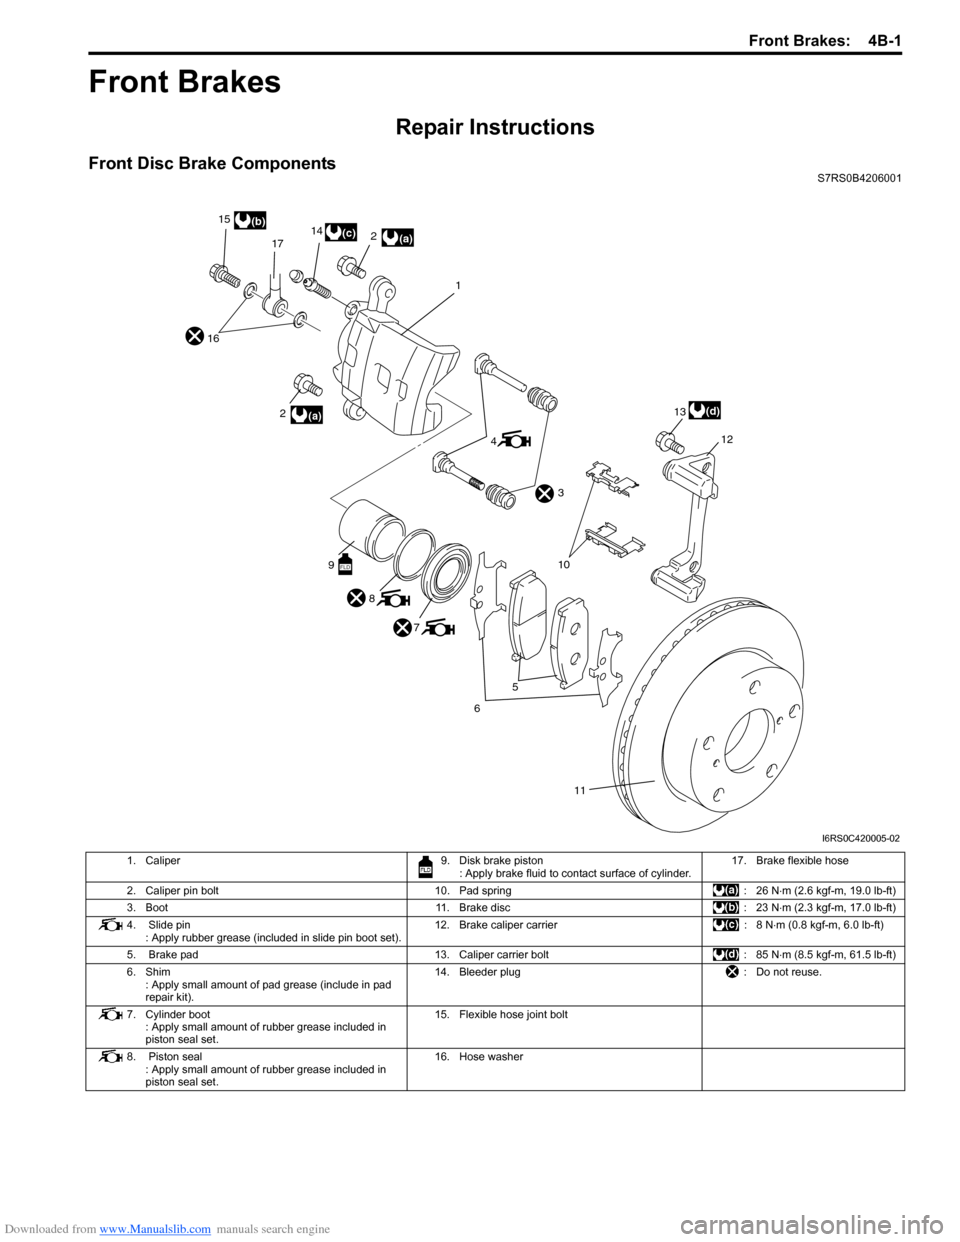 SUZUKI SWIFT 2005 2.G Service Workshop Manual Downloaded from www.Manualslib.com manuals search engine Front Brakes:  4B-1
Brakes
Front Brakes
Repair Instructions
Front Disc Brake ComponentsS7RS0B4206001
11
5
6
10
4
1
16
17
12
8
7
3
2(a)
15
(b)
1